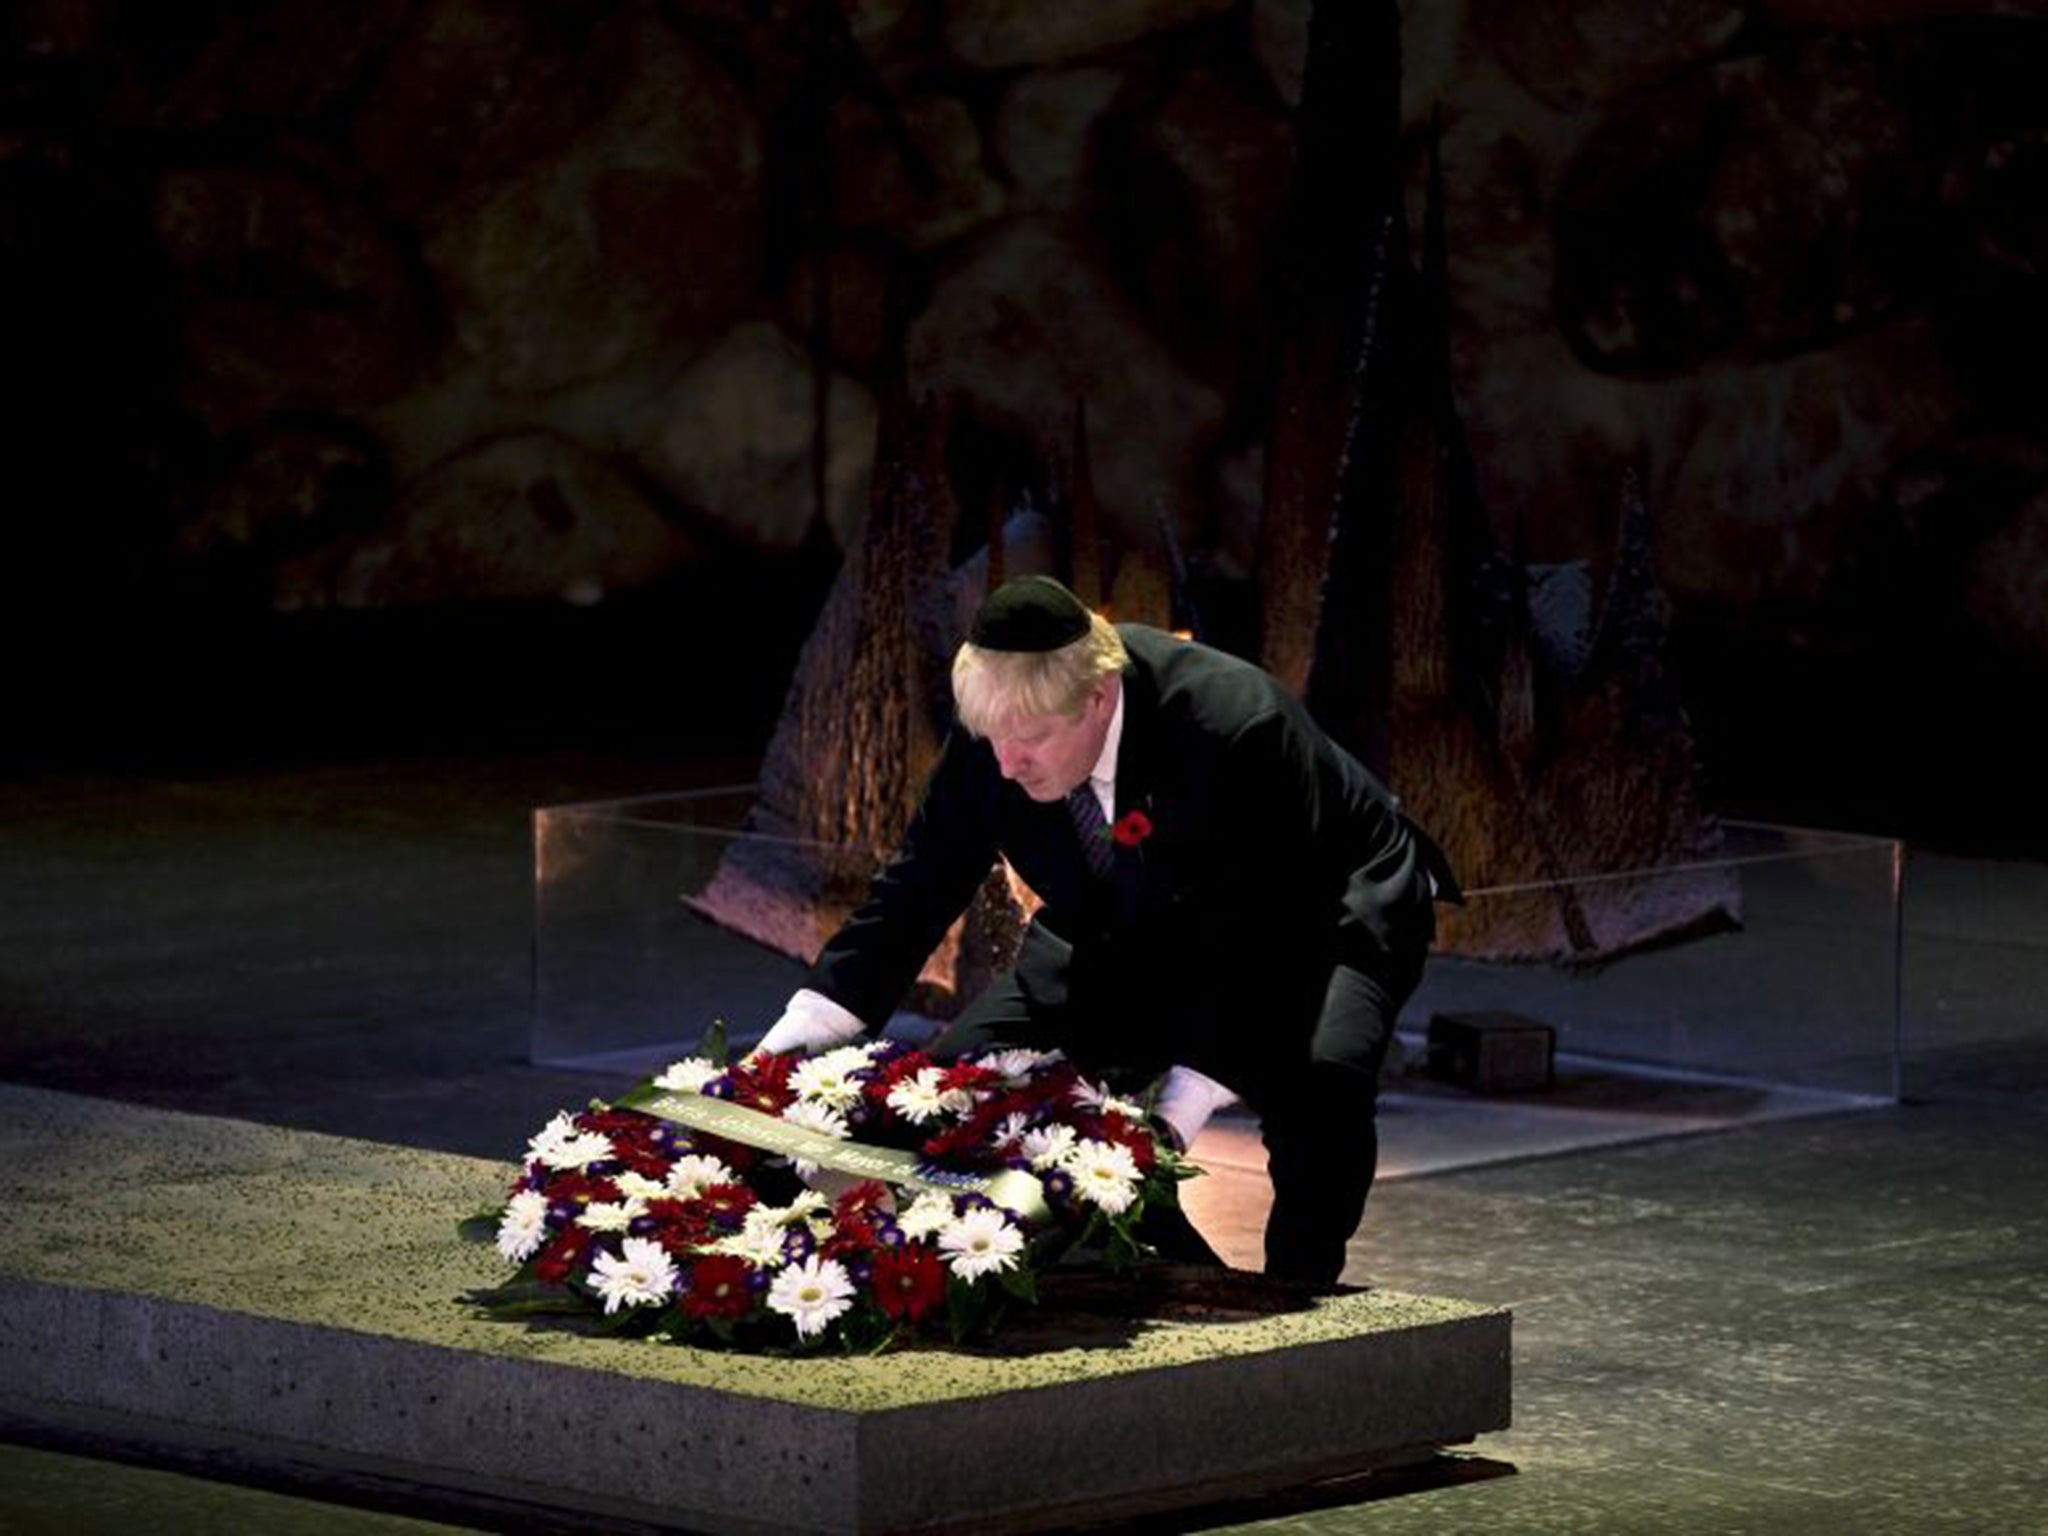 London Mayor Boris Johnson lays a wreath during a ceremony in the Hall of Remembrance at Yad Vashem Holocaust Memorial in Jerusalem